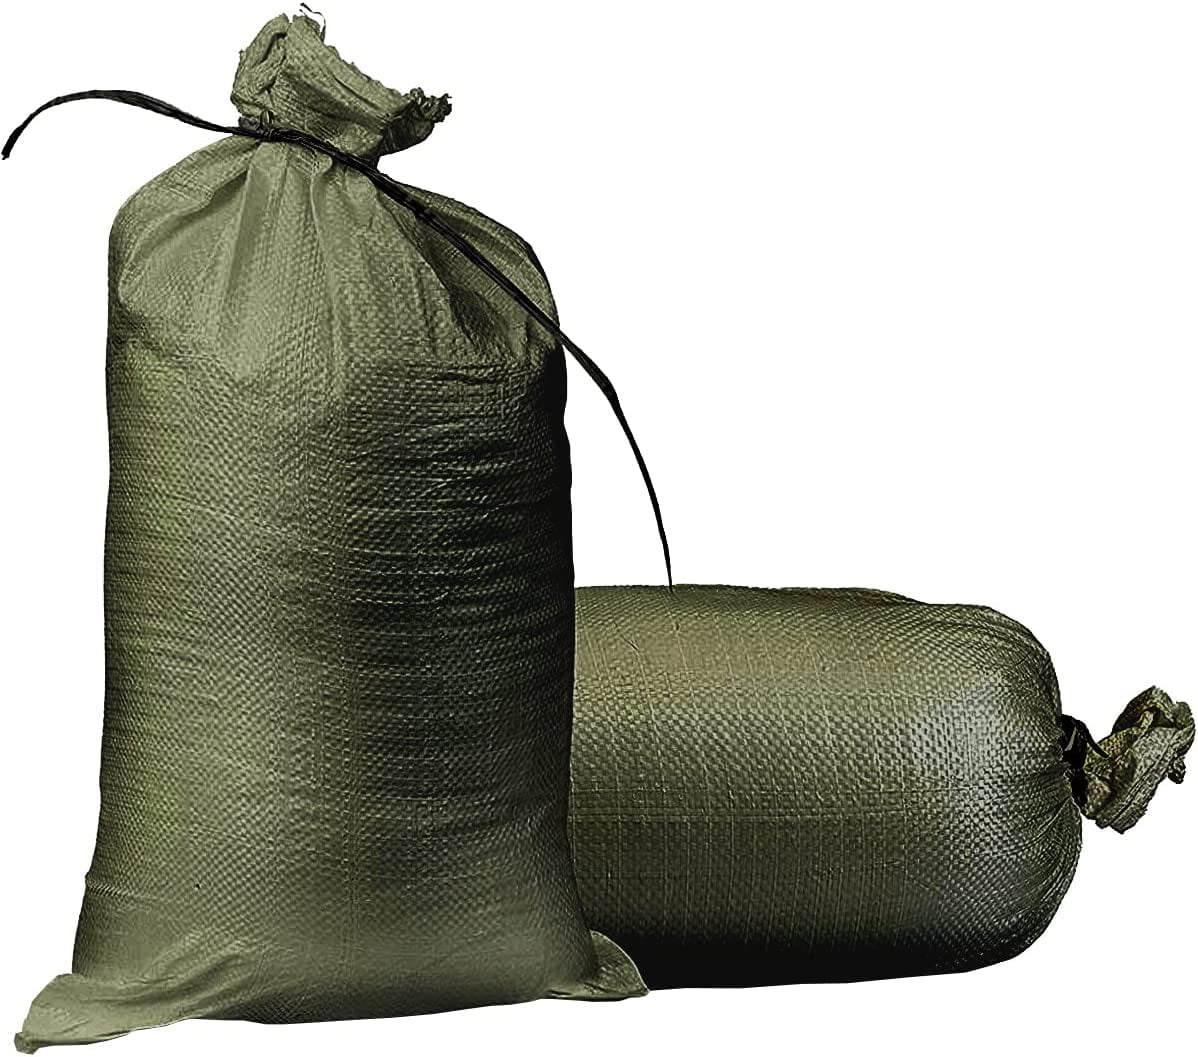 267 Military Sand Bags Stock Photos HighRes Pictures and Images  Getty  Images